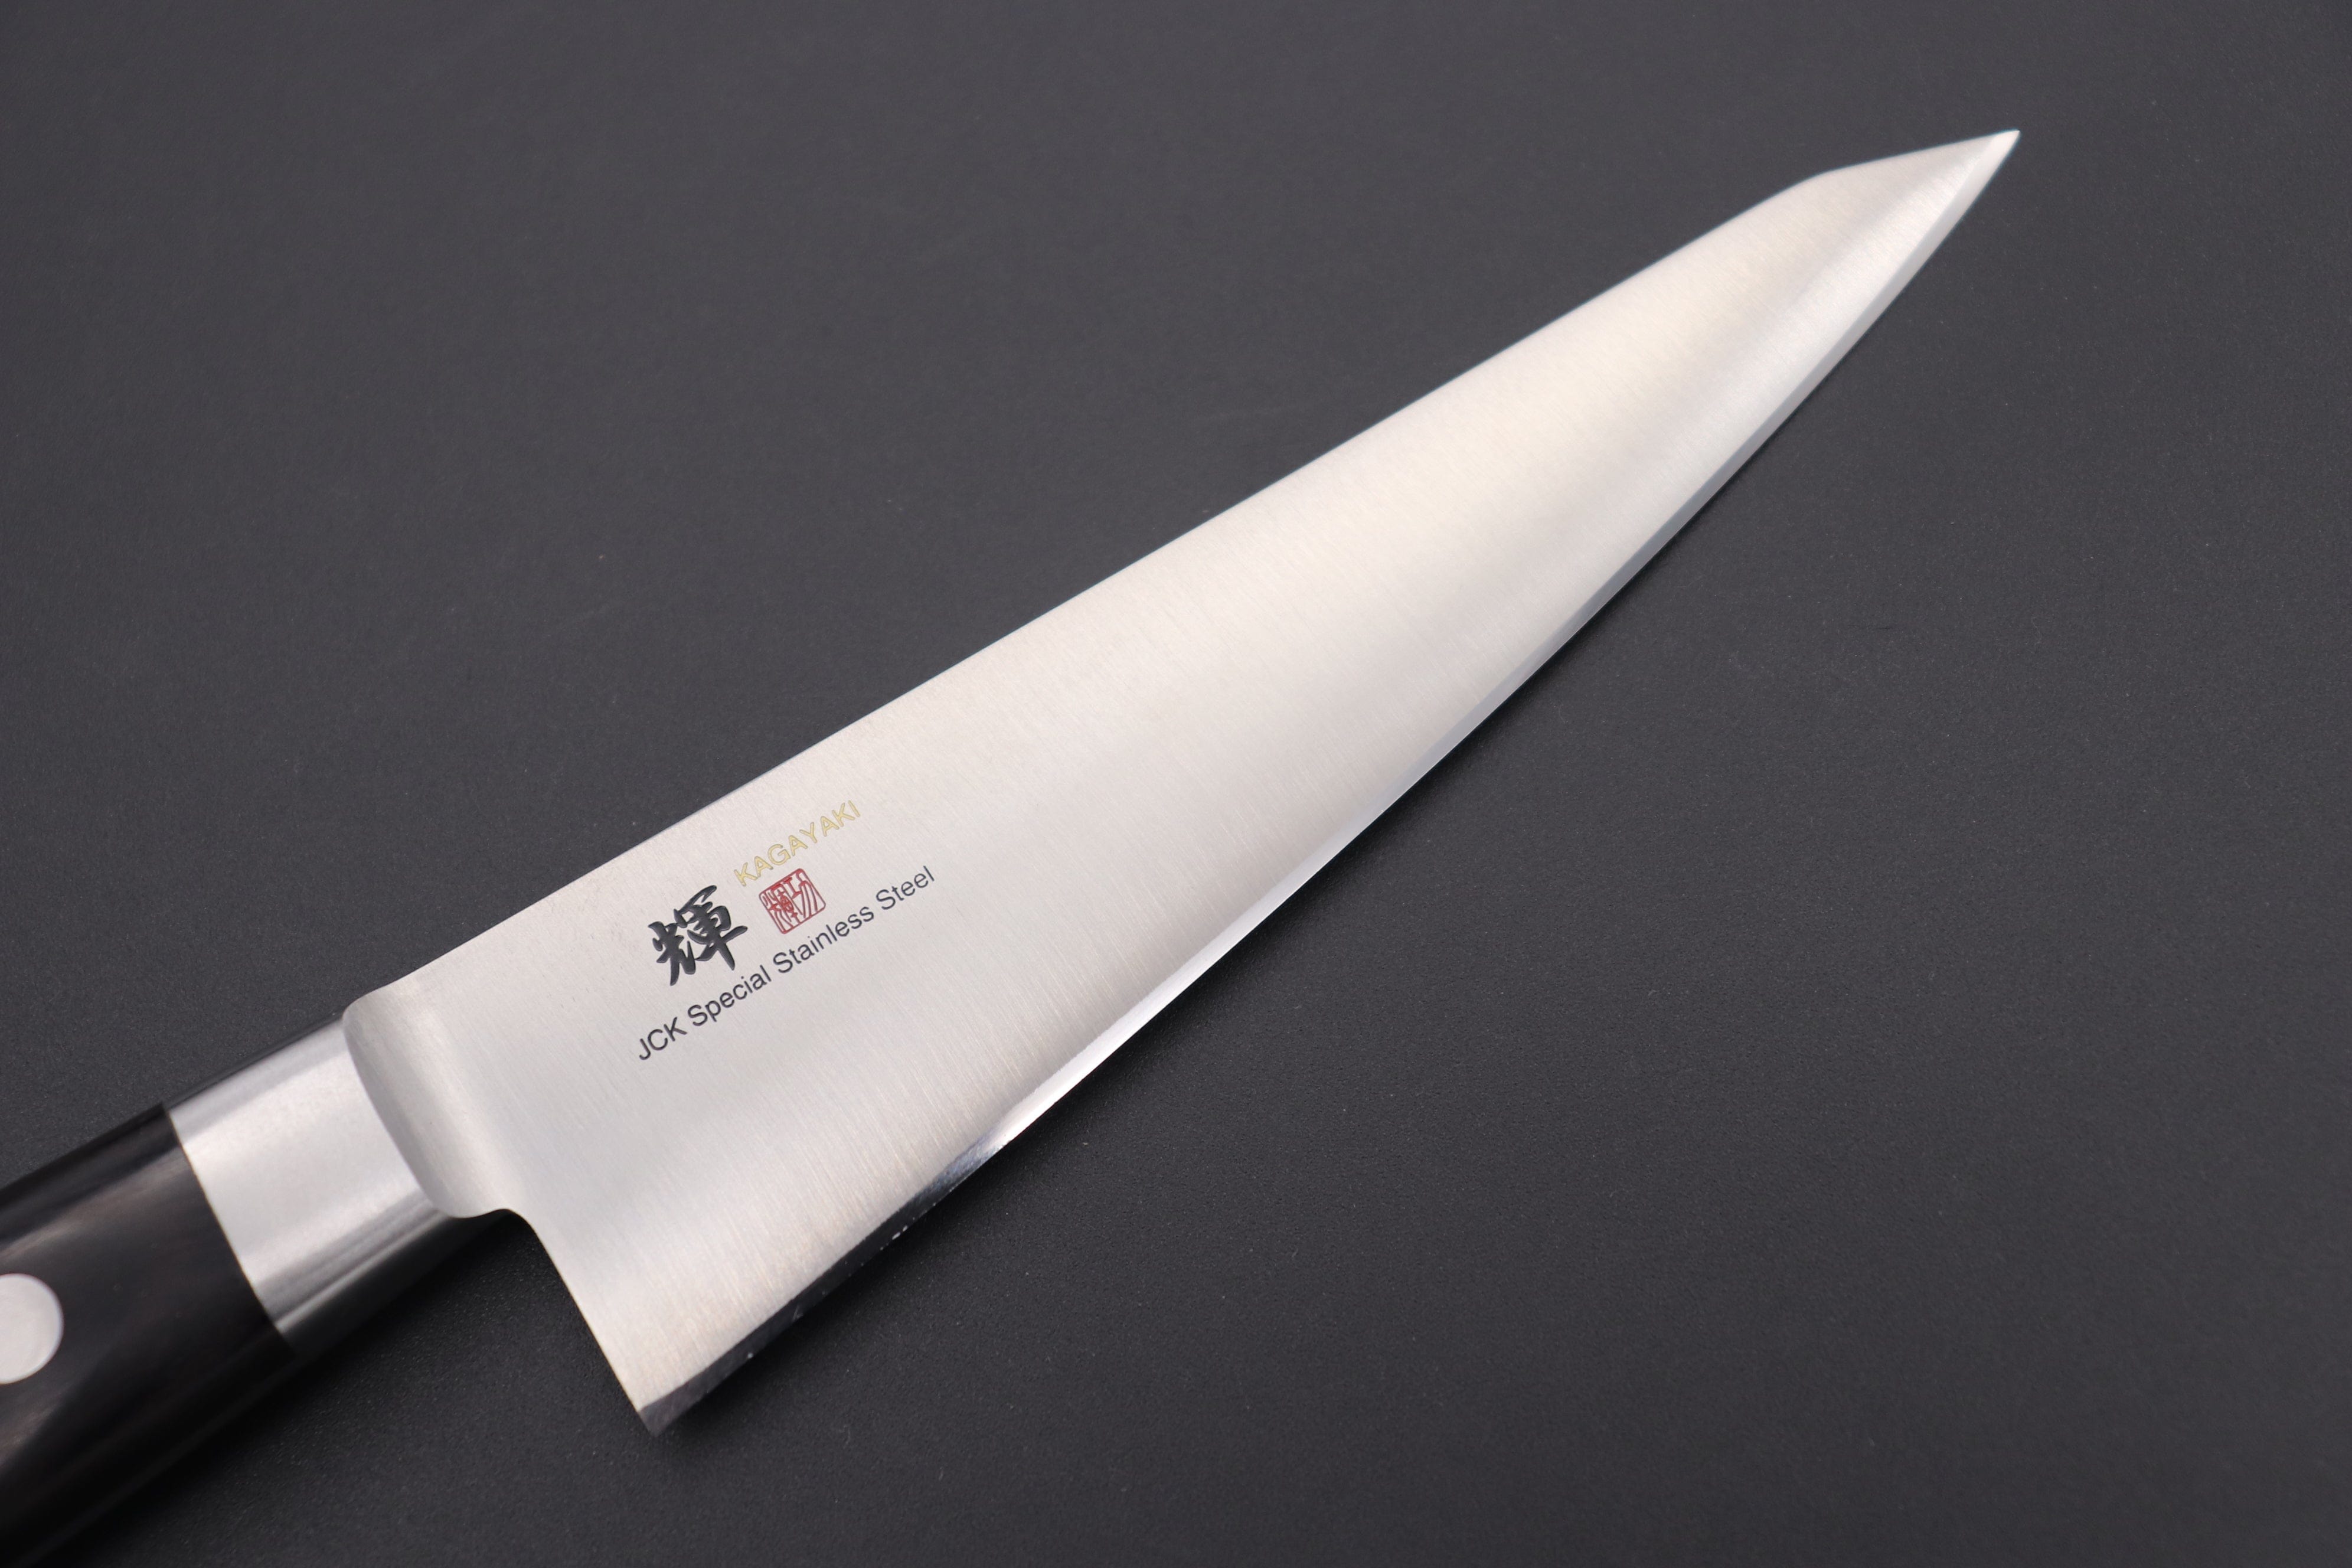 Cutlery - Industrial Boning, Breaking & Butcher Knives and Sharpeners